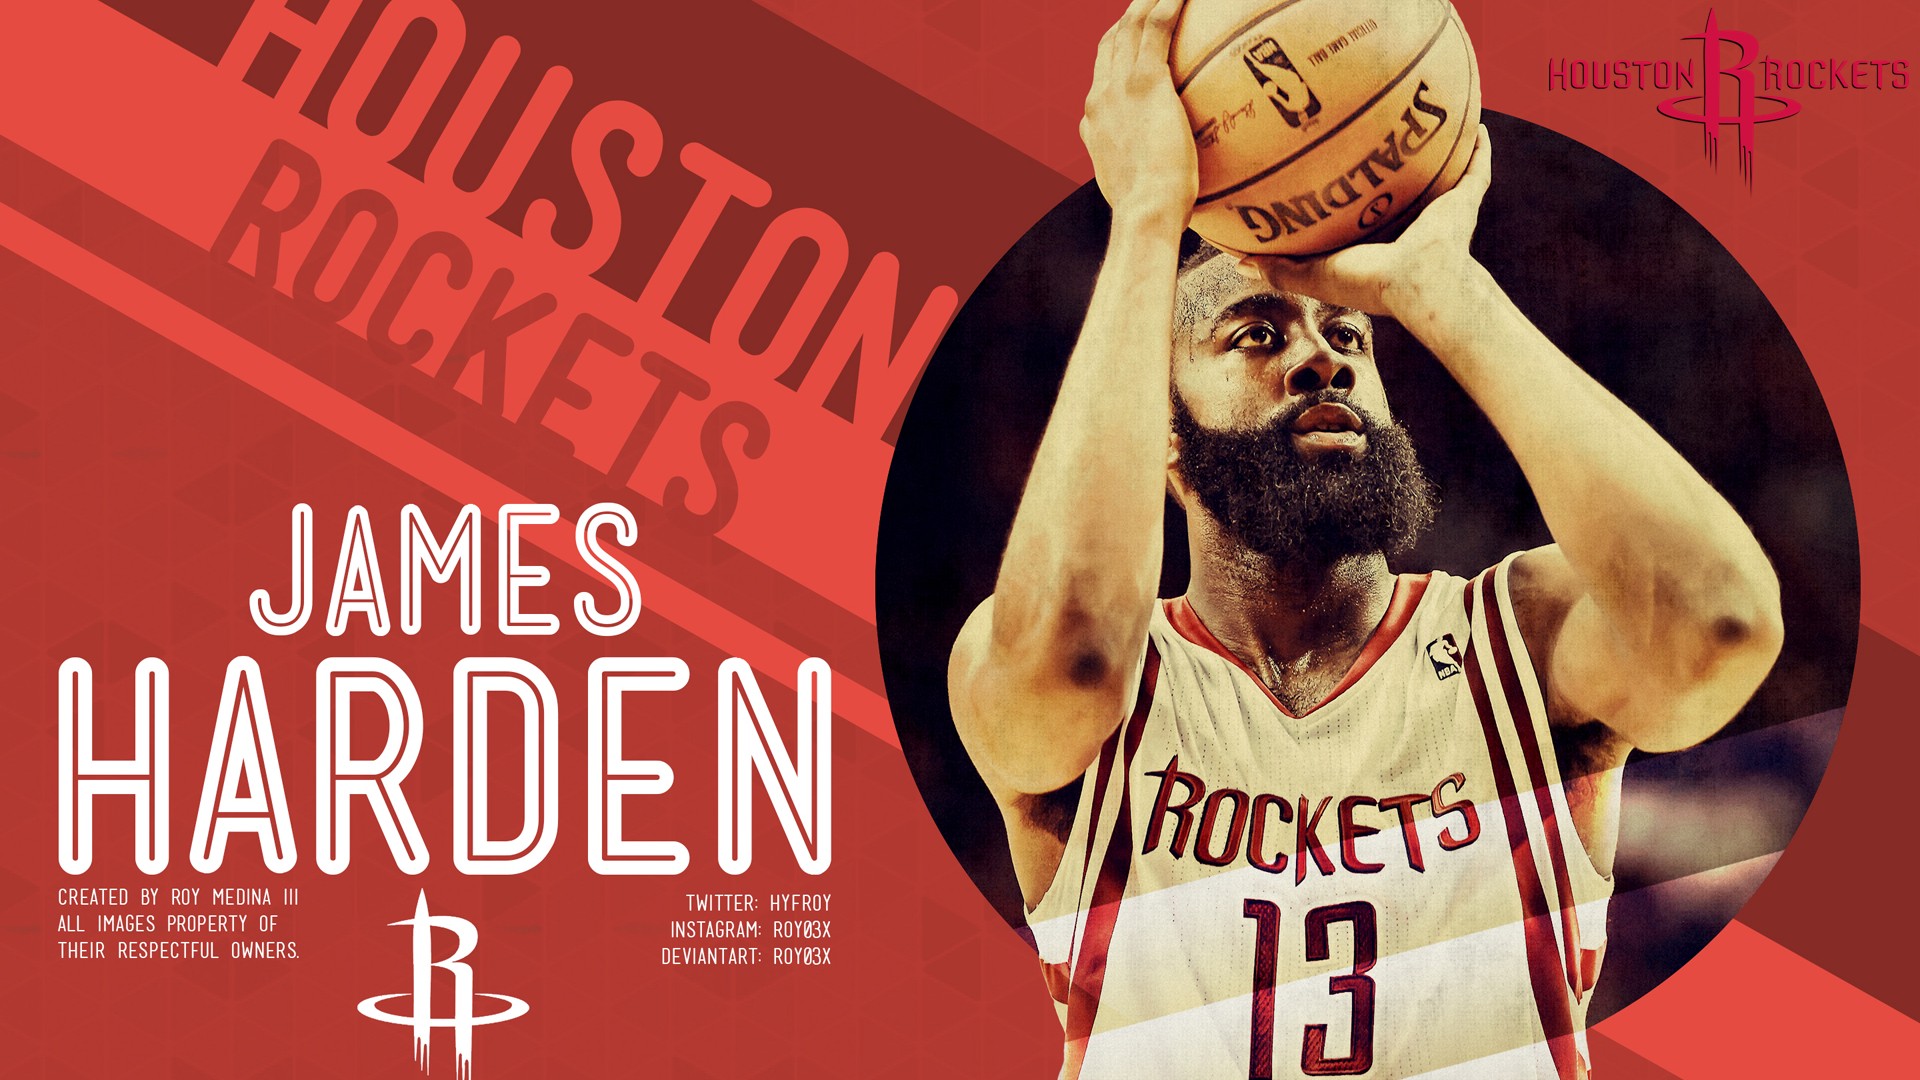 James Harden For PC Wallpaper with image dimensions 1920X1080 pixel. You can make this wallpaper for your Desktop Computer Backgrounds, Windows or Mac Screensavers, iPhone Lock screen, Tablet or Android and another Mobile Phone device